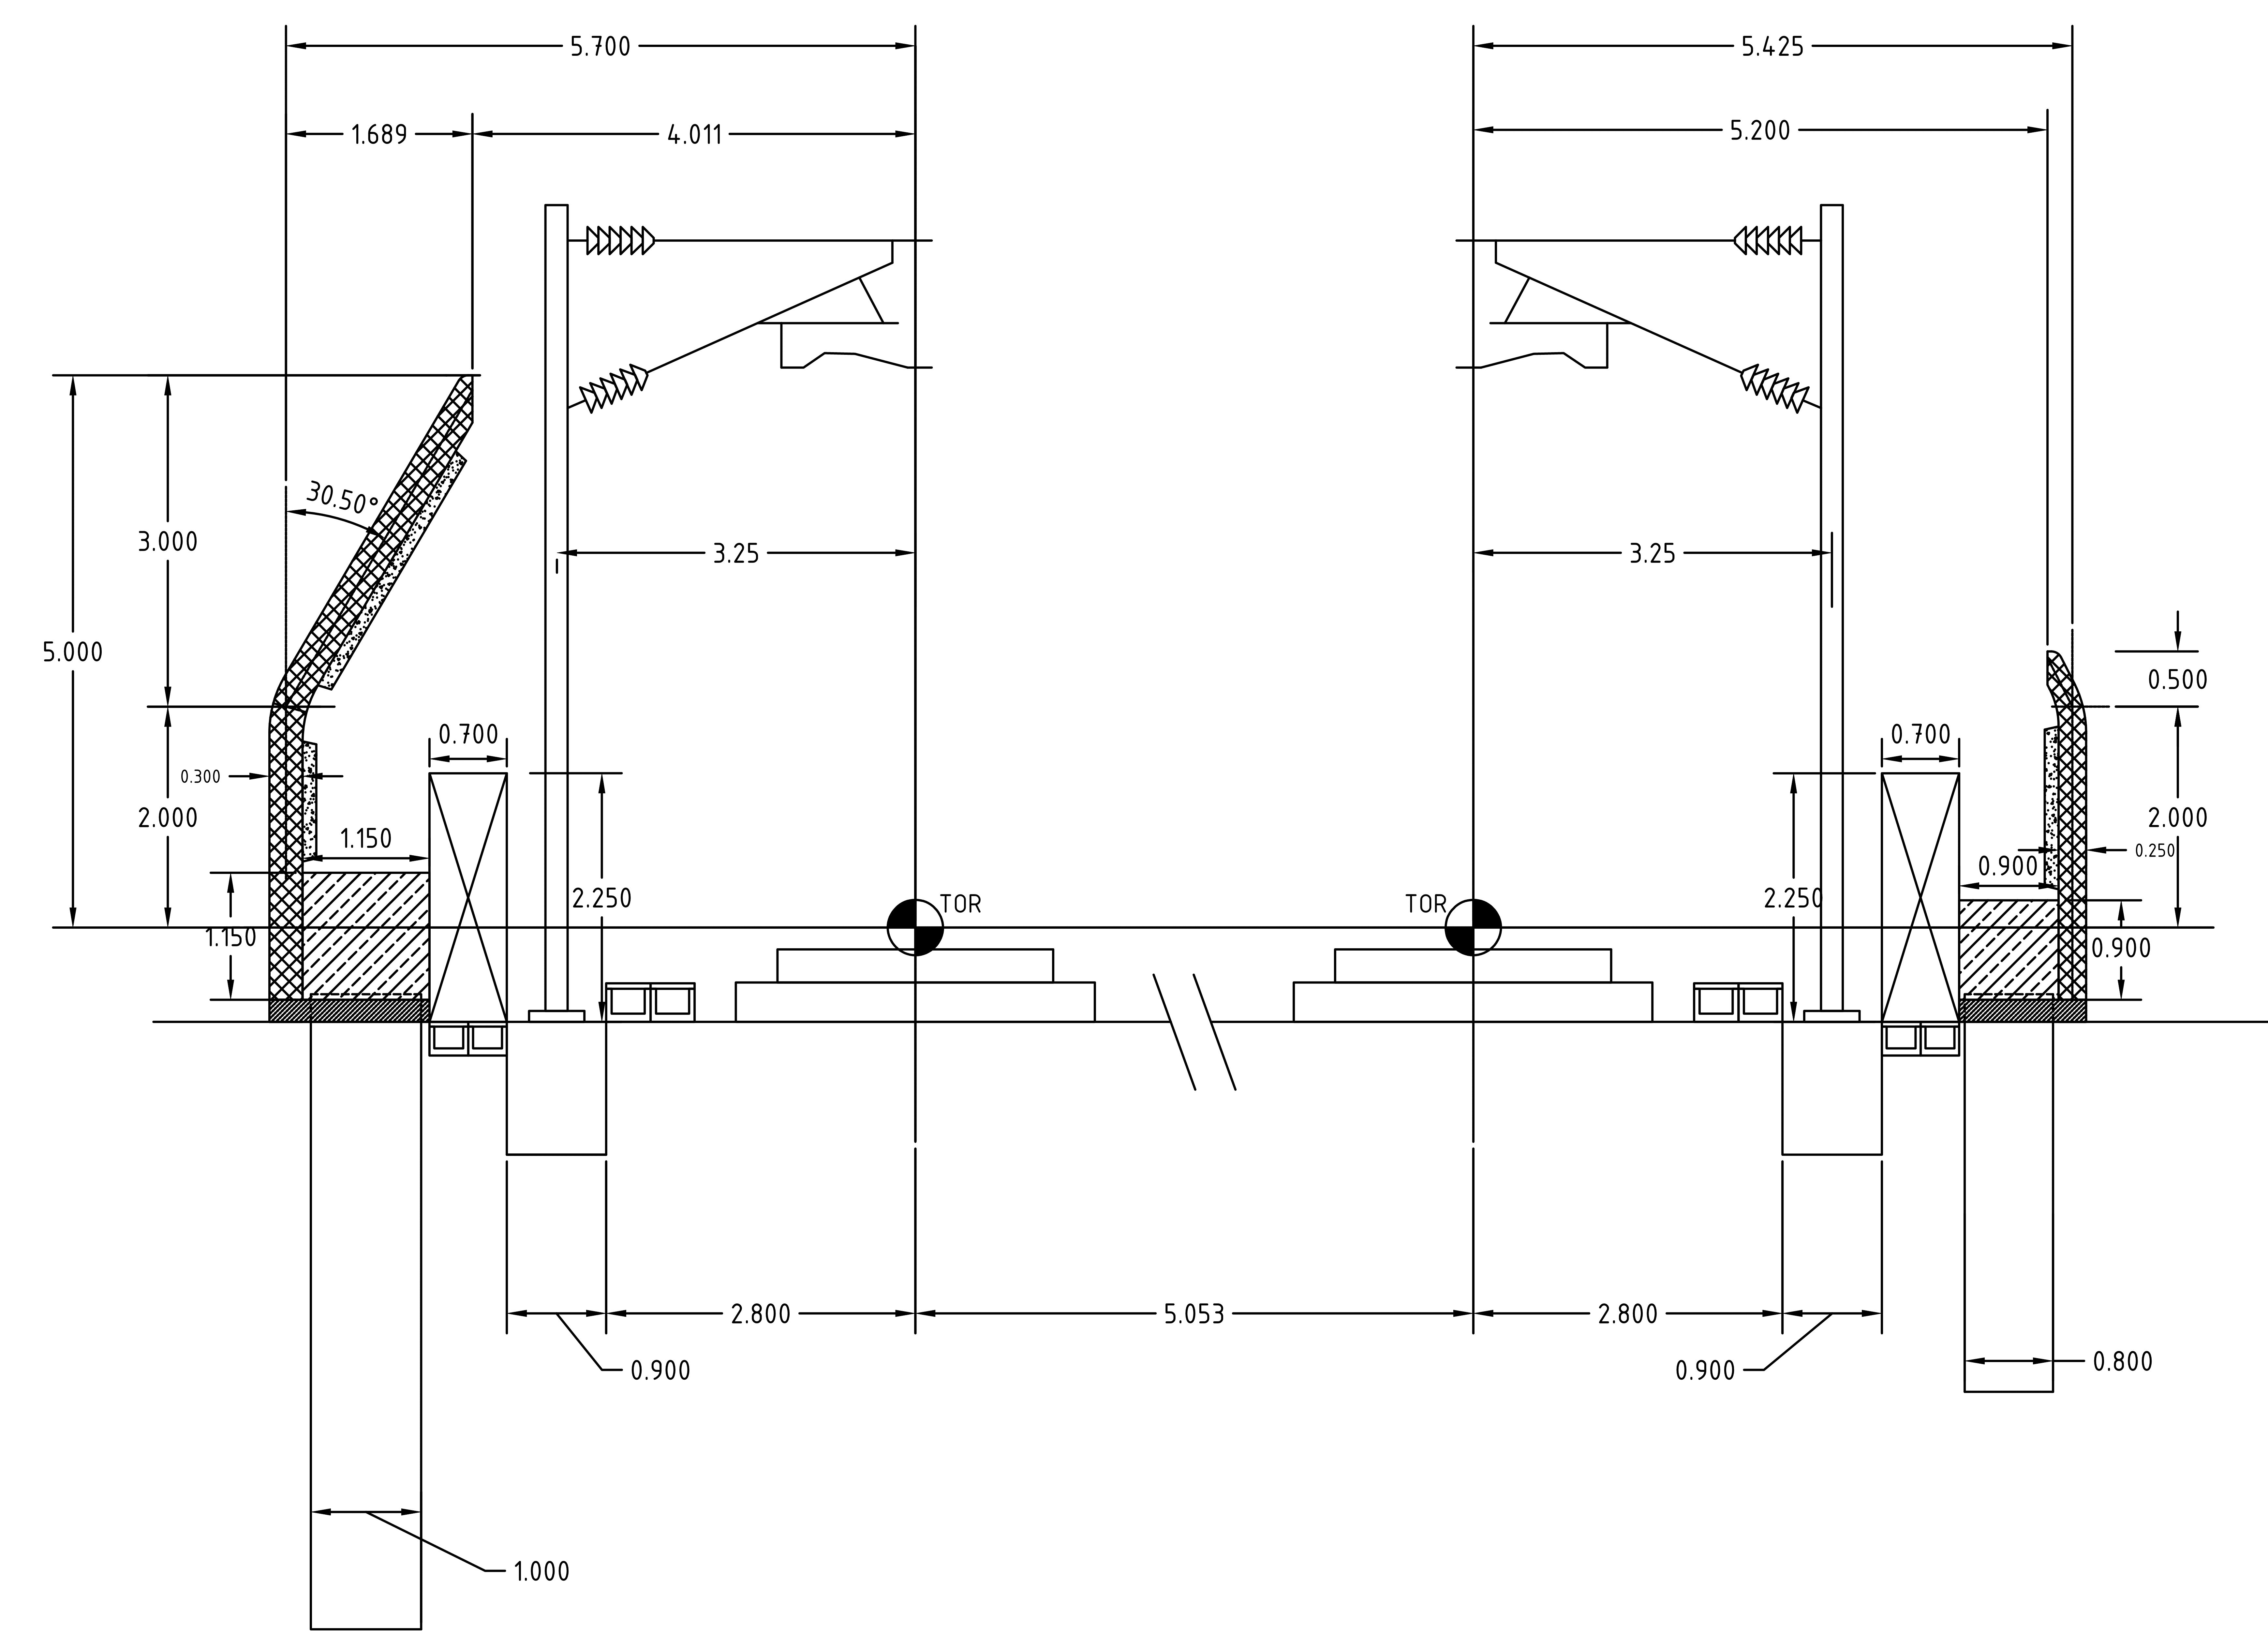 Diagram of a section of track at West Ruislip showing the cranked noise barrier